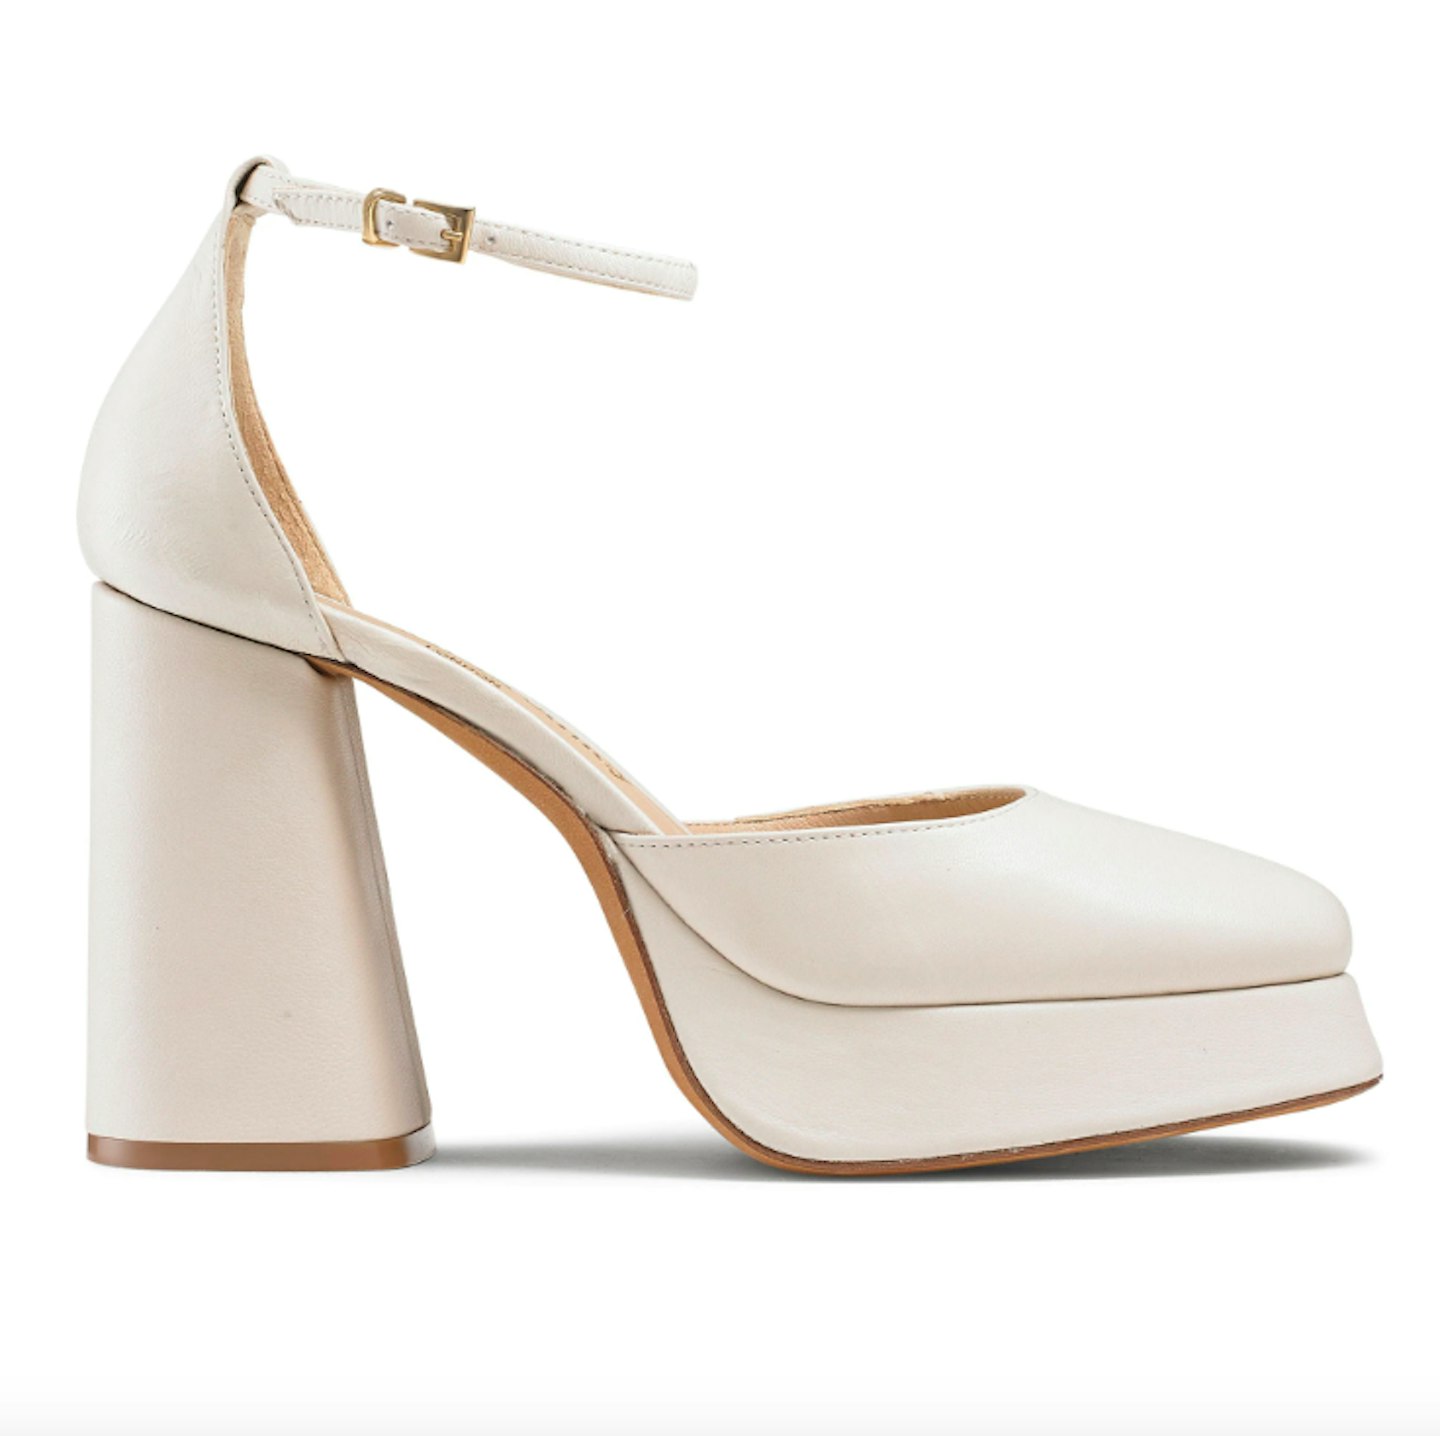 Russell & Bromley, Flawless Platforms